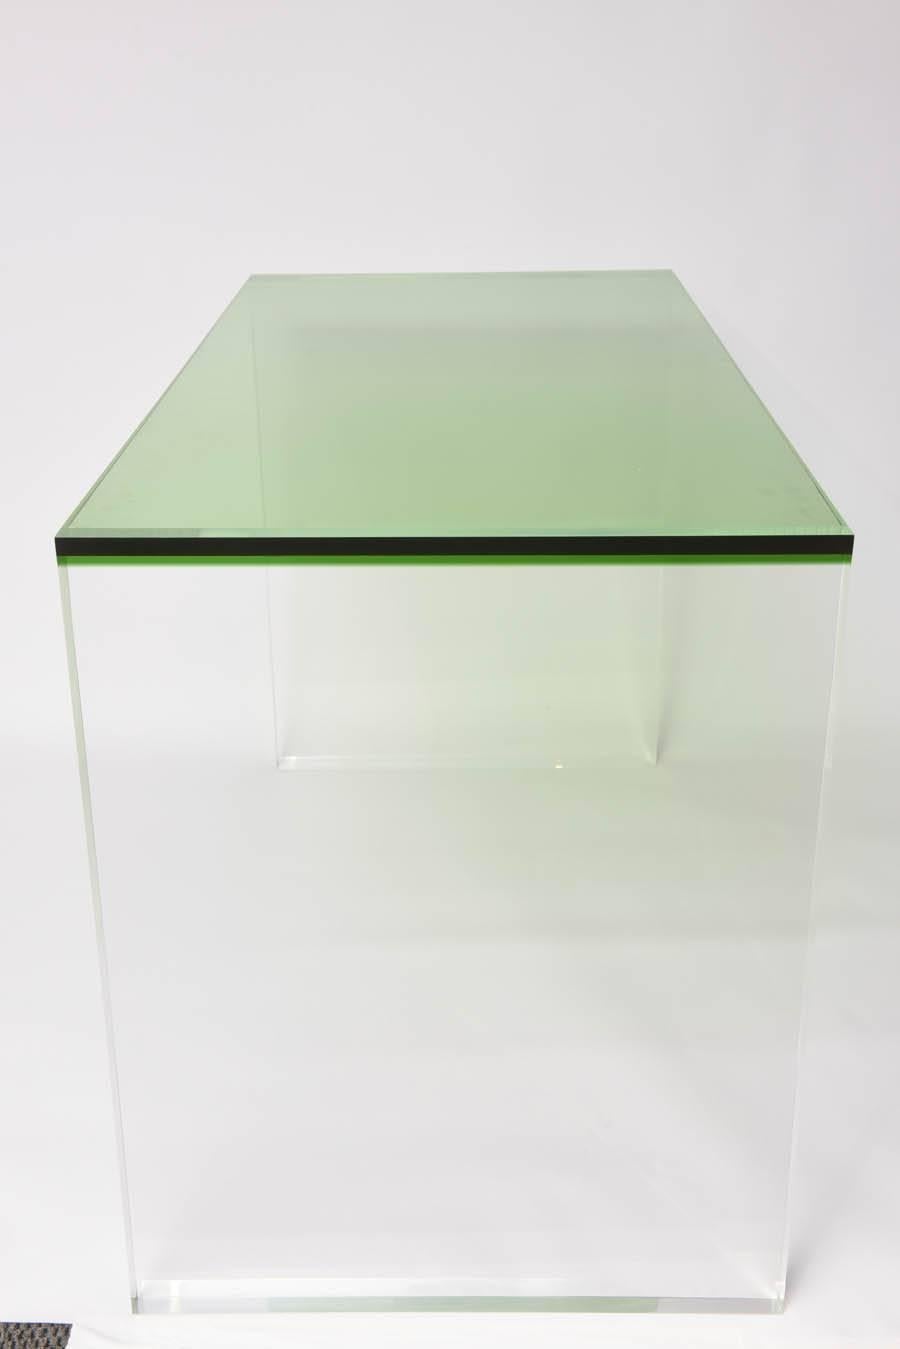 Two-Toned Acrylic Desk in Green and Clear 1